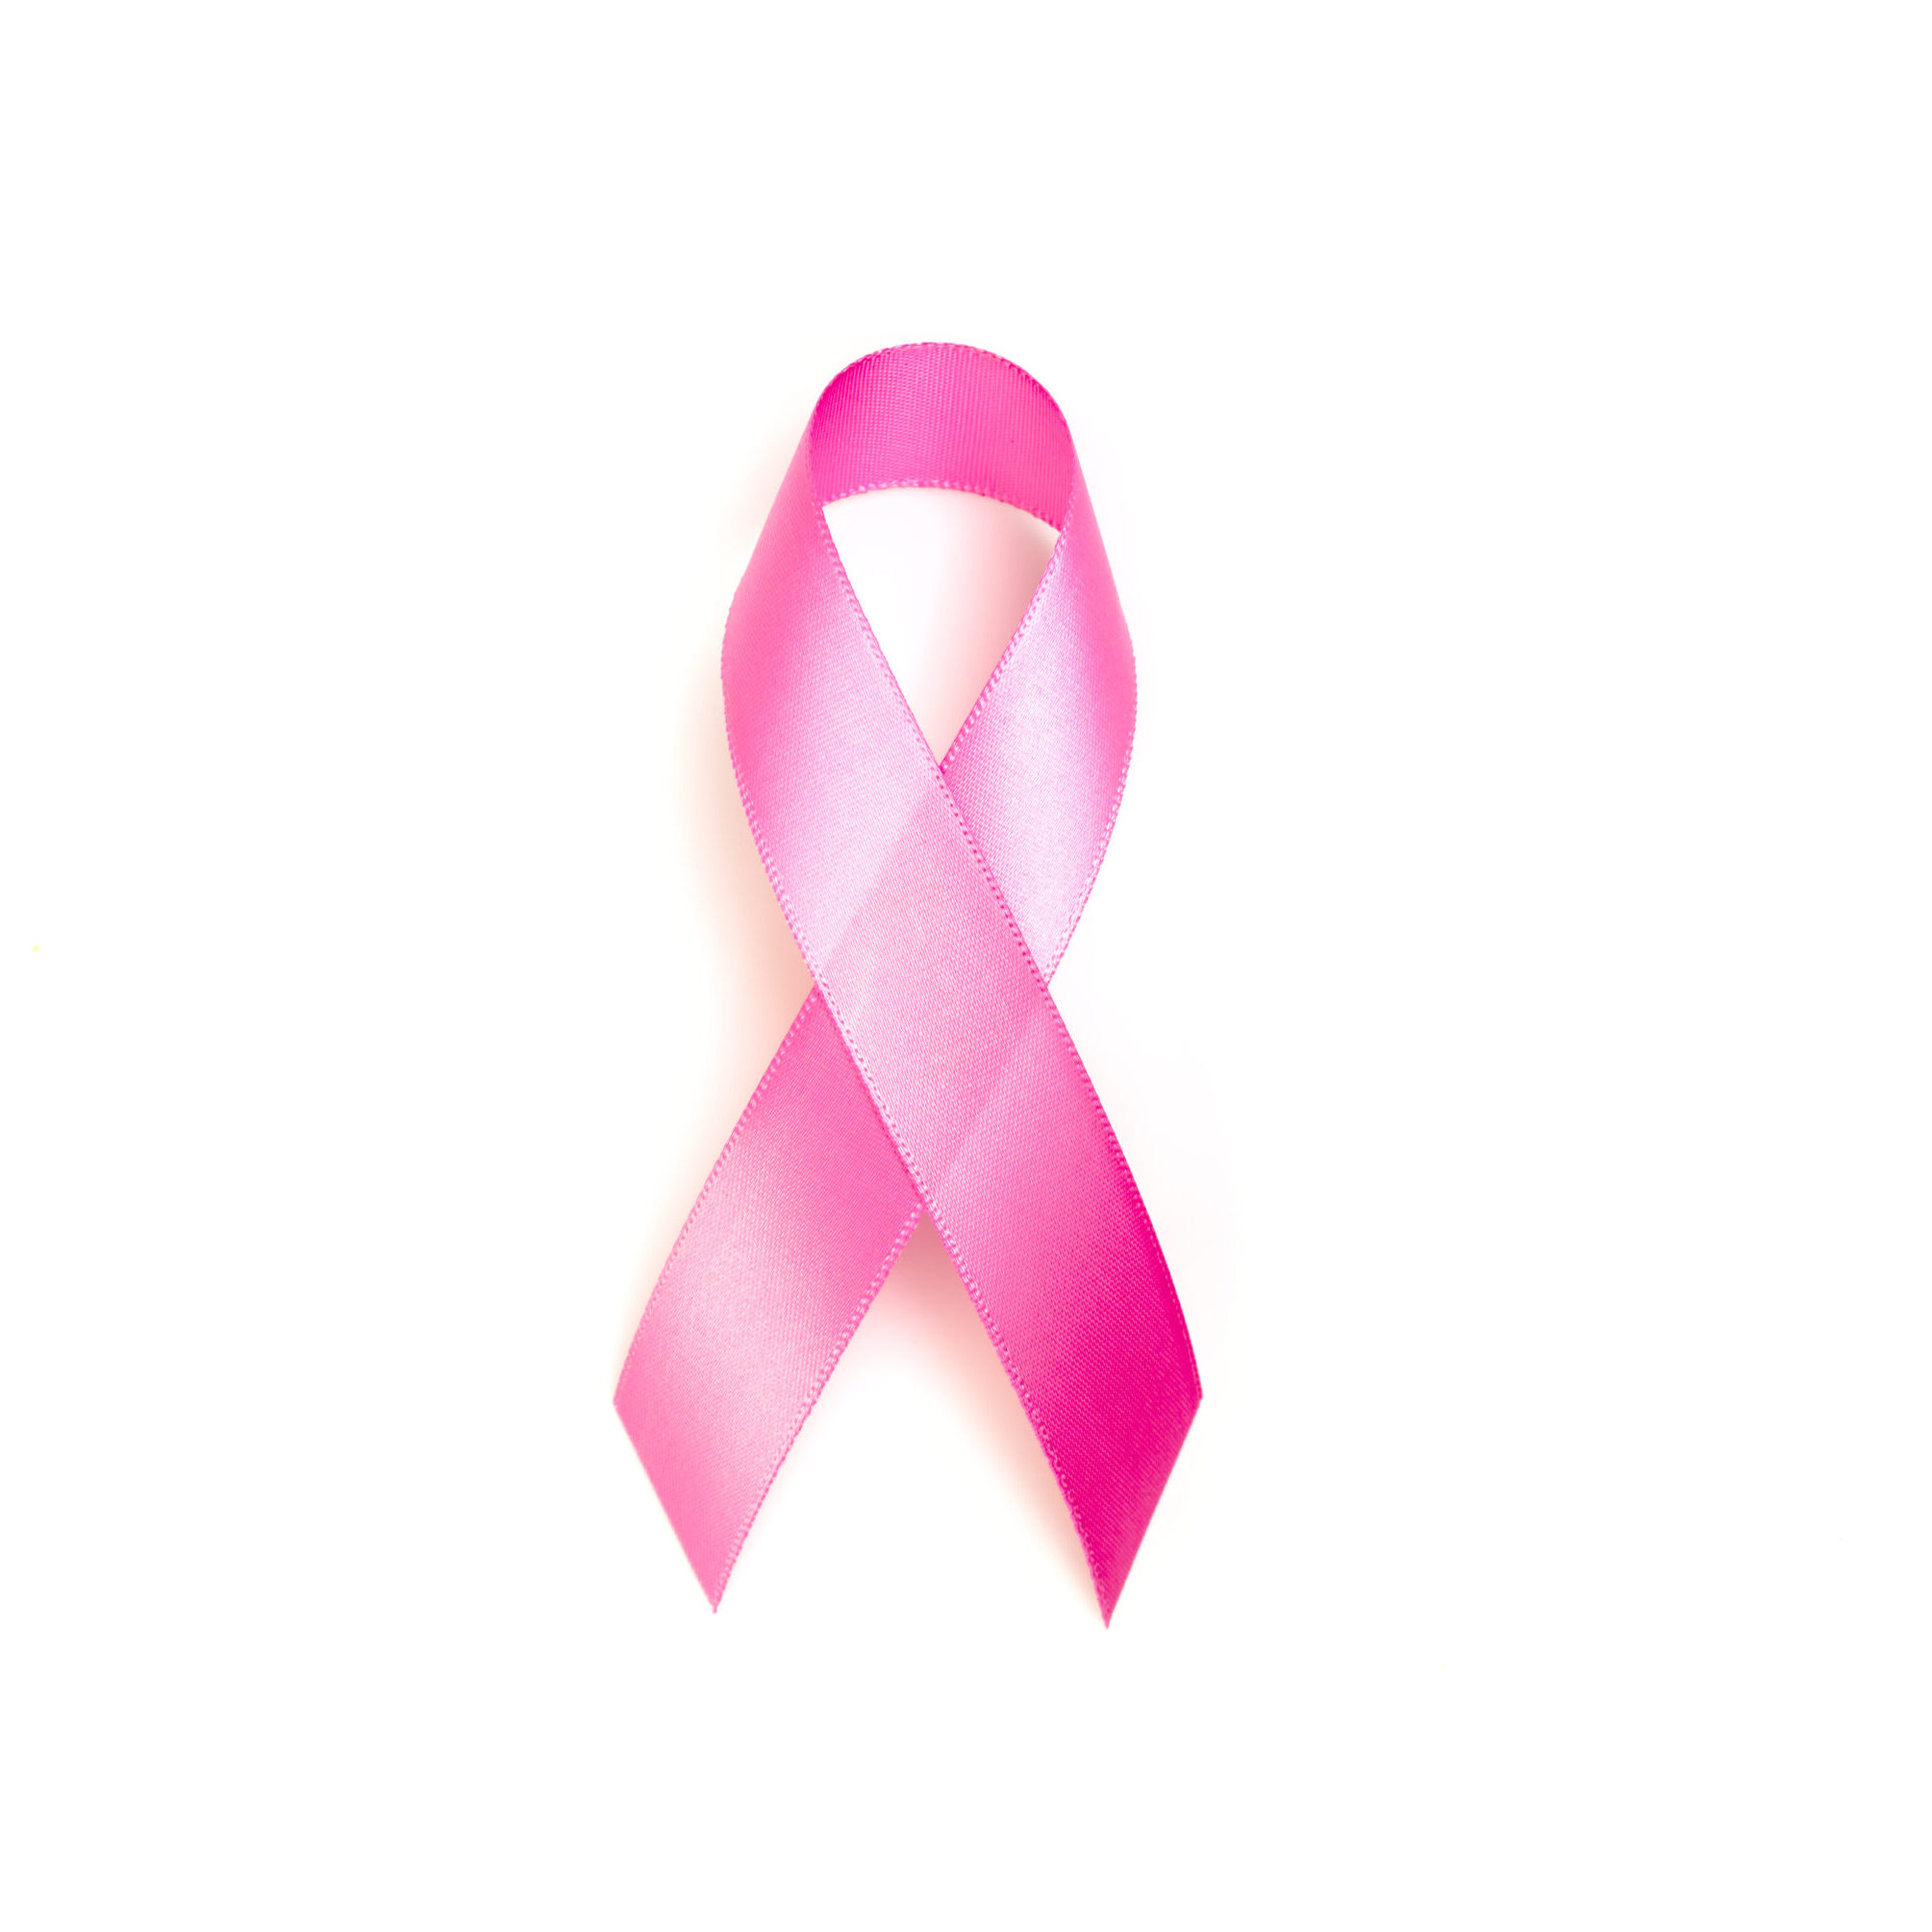 World cancer day : Breast Cancer Awareness Ribbon on white Background